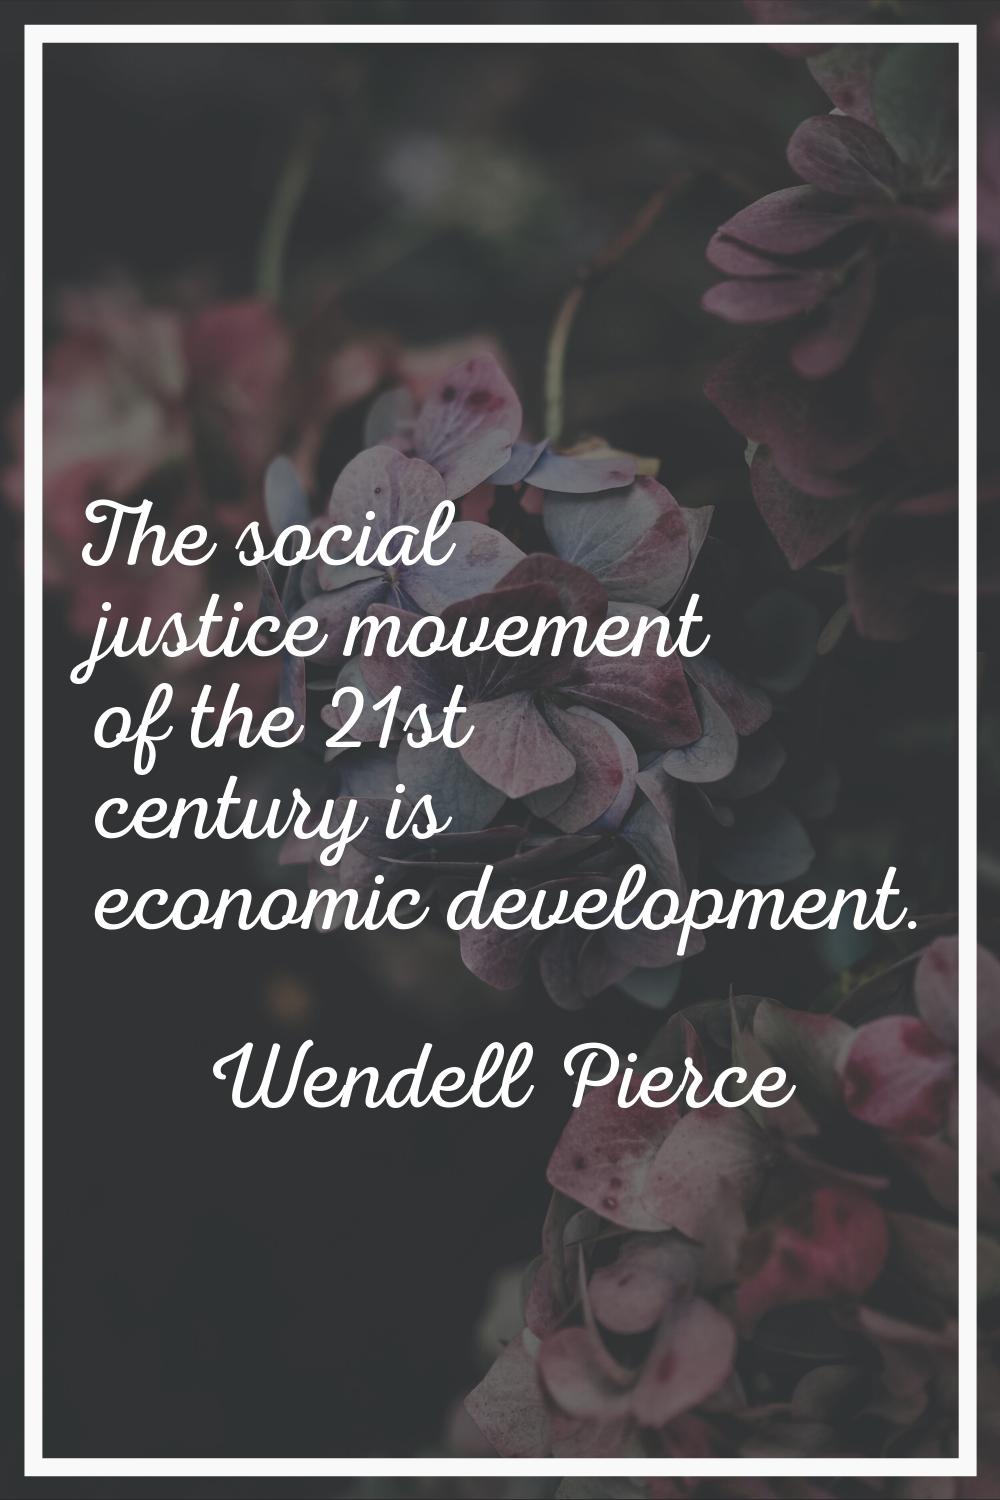 The social justice movement of the 21st century is economic development.